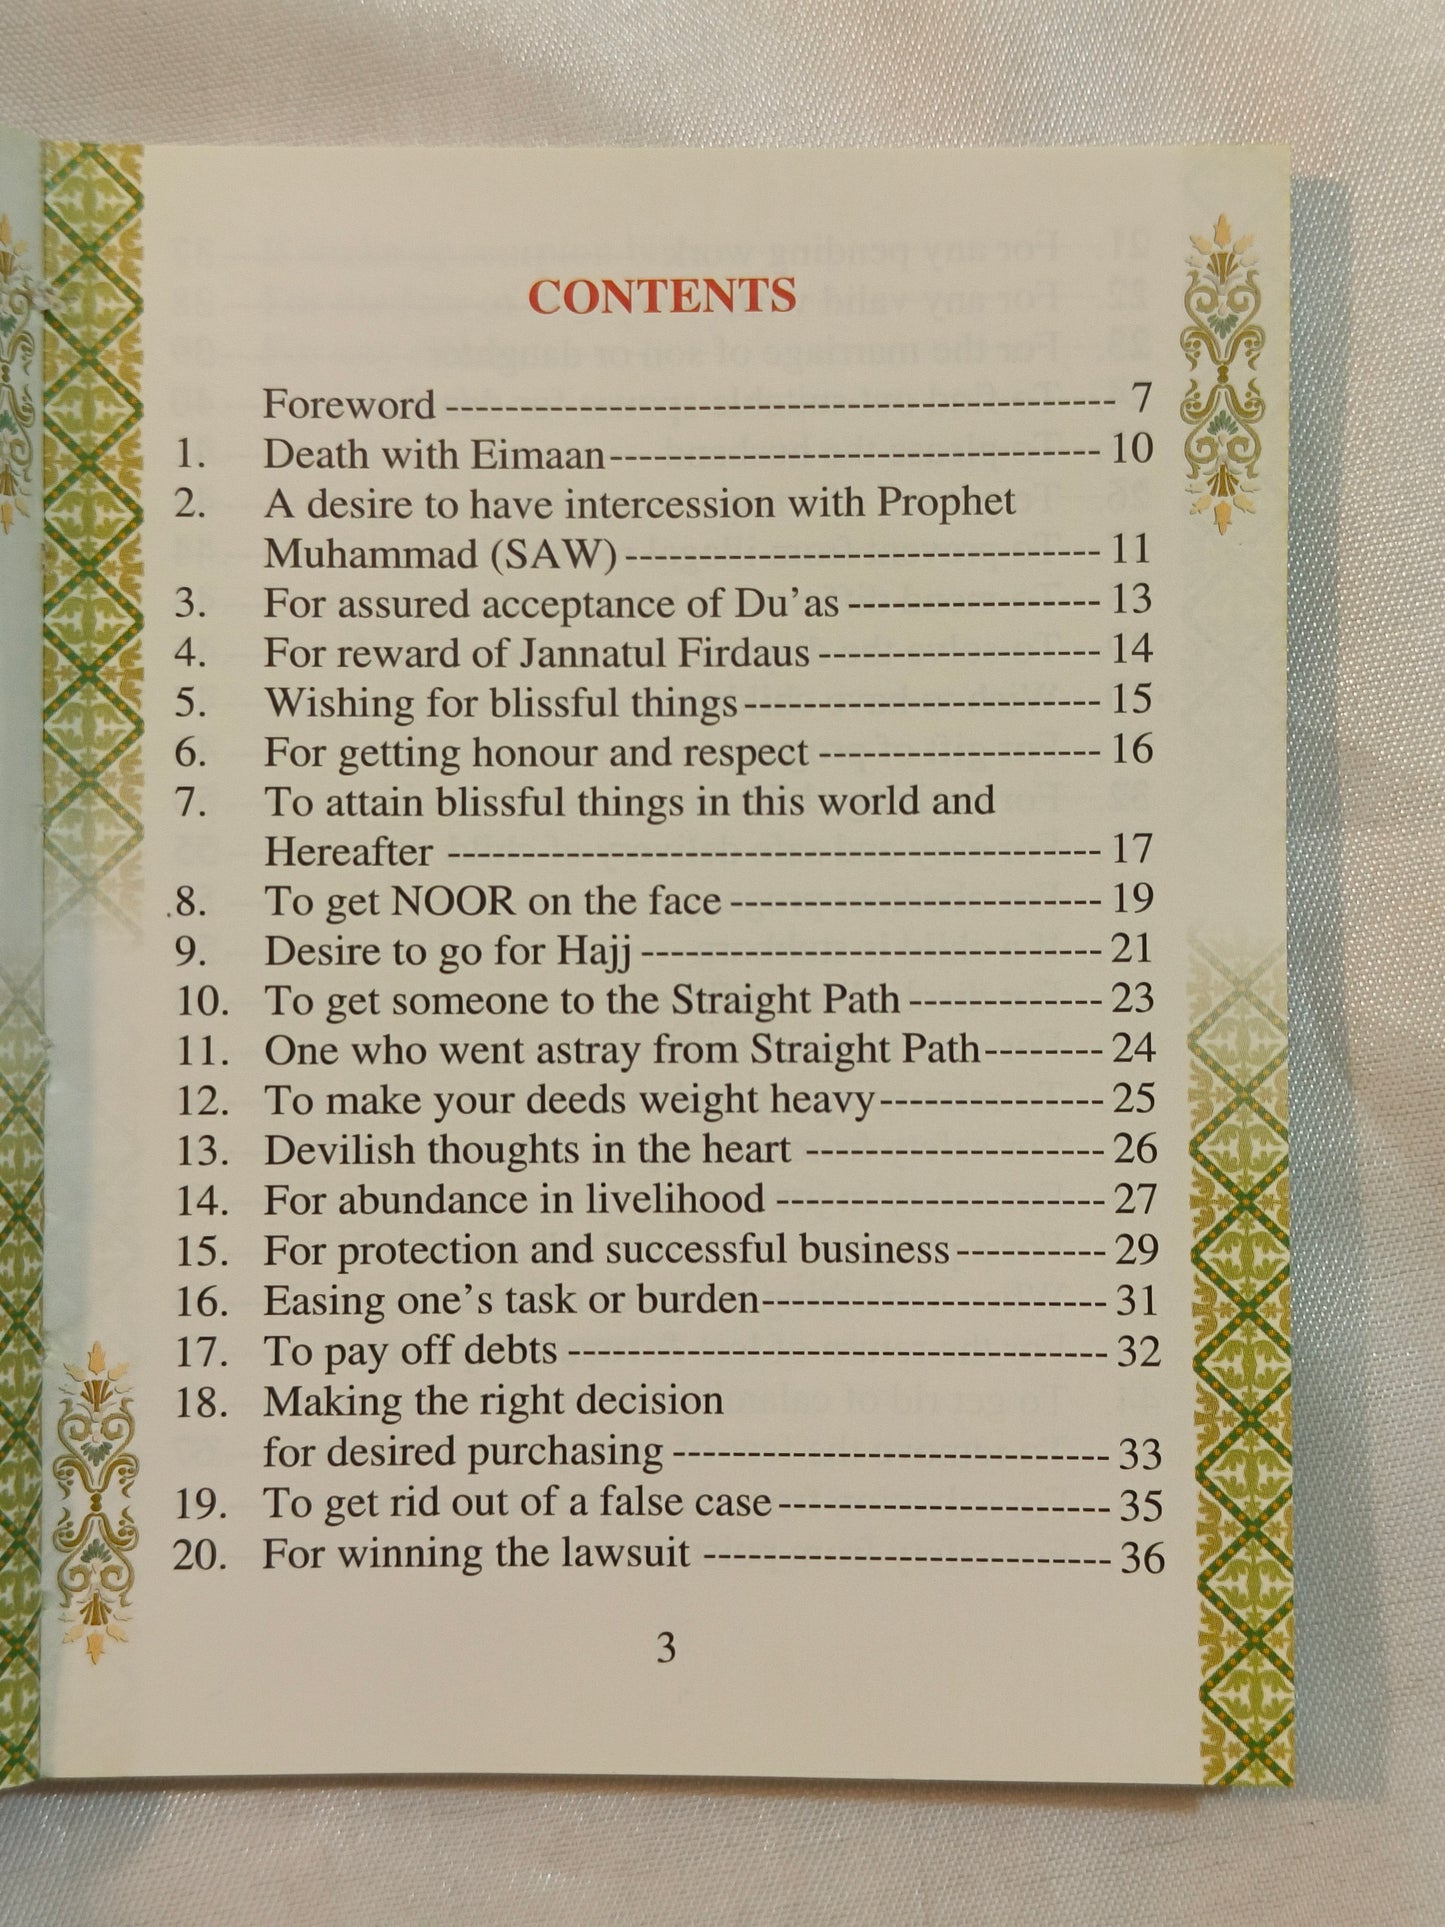 Cures from the Holy Quran - alifthebookstore